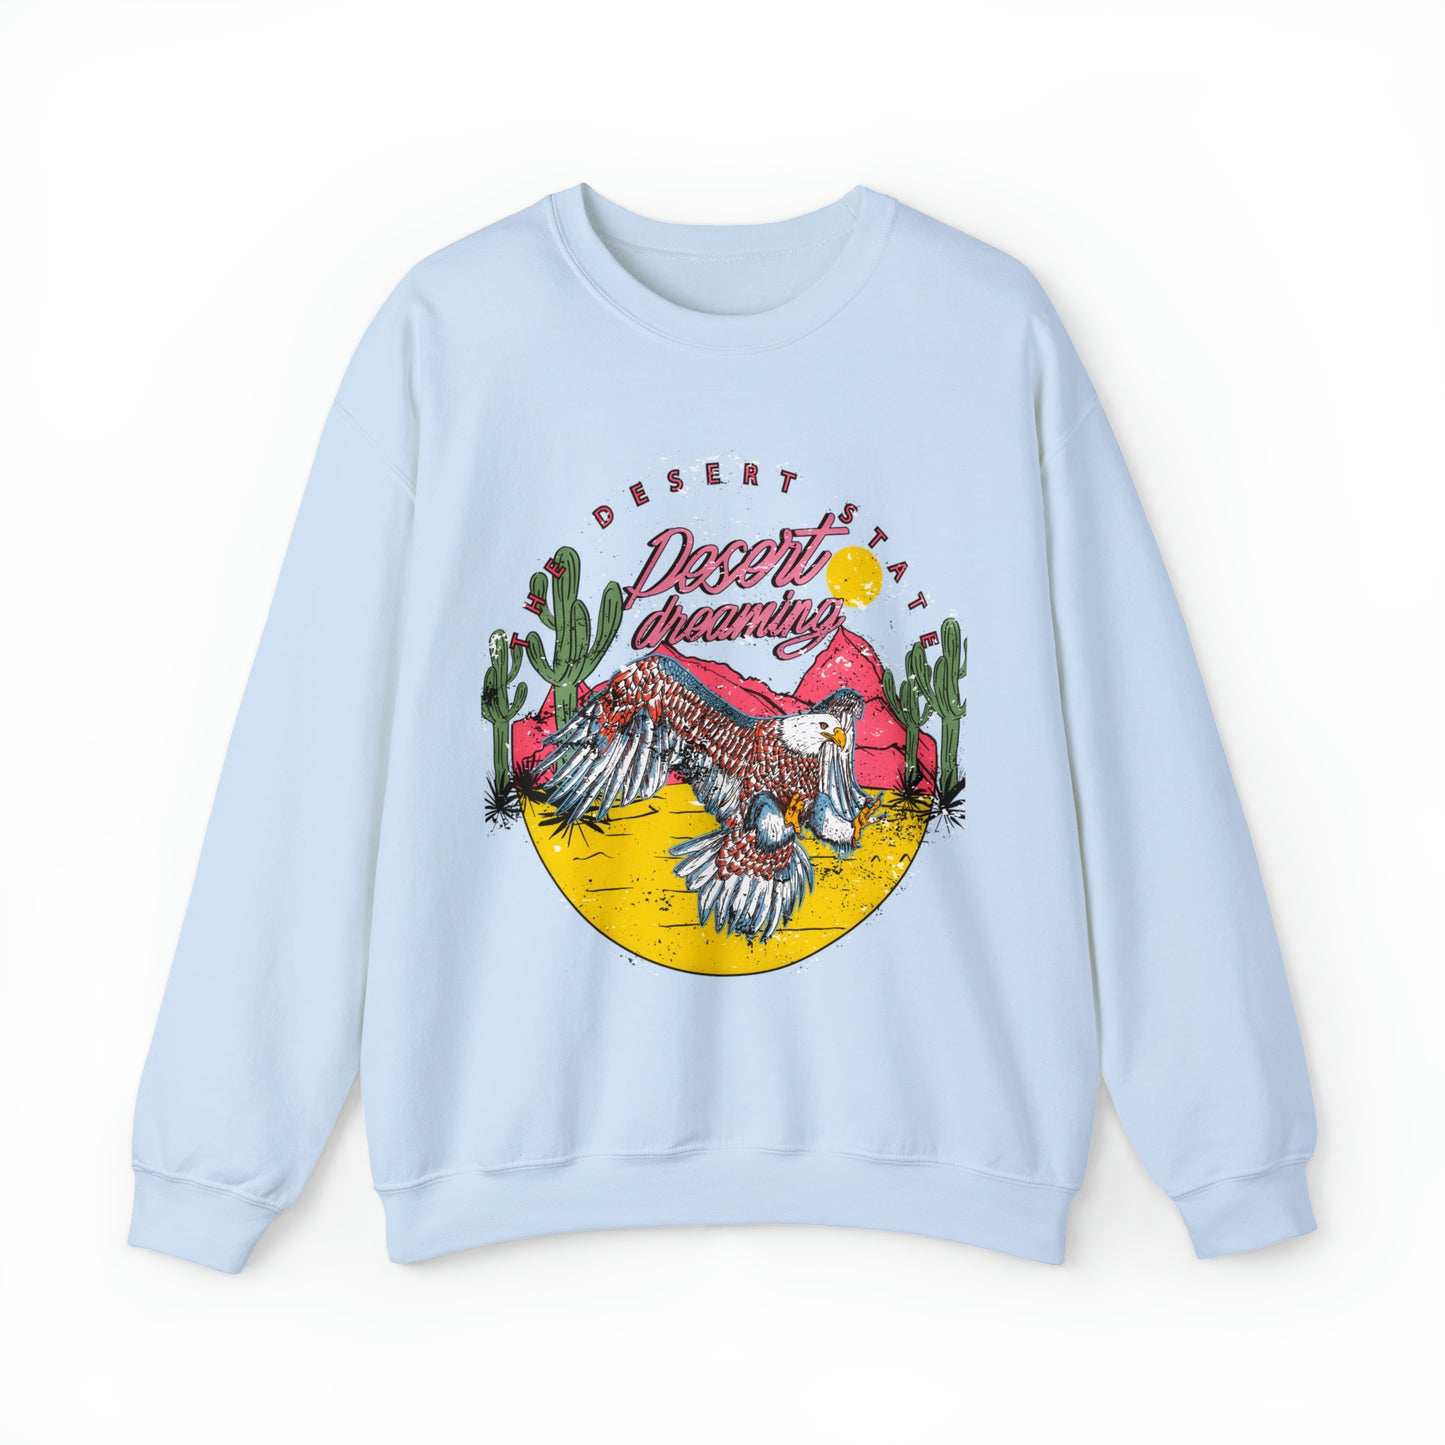 The Desert State of Dreaming // CREWNECK